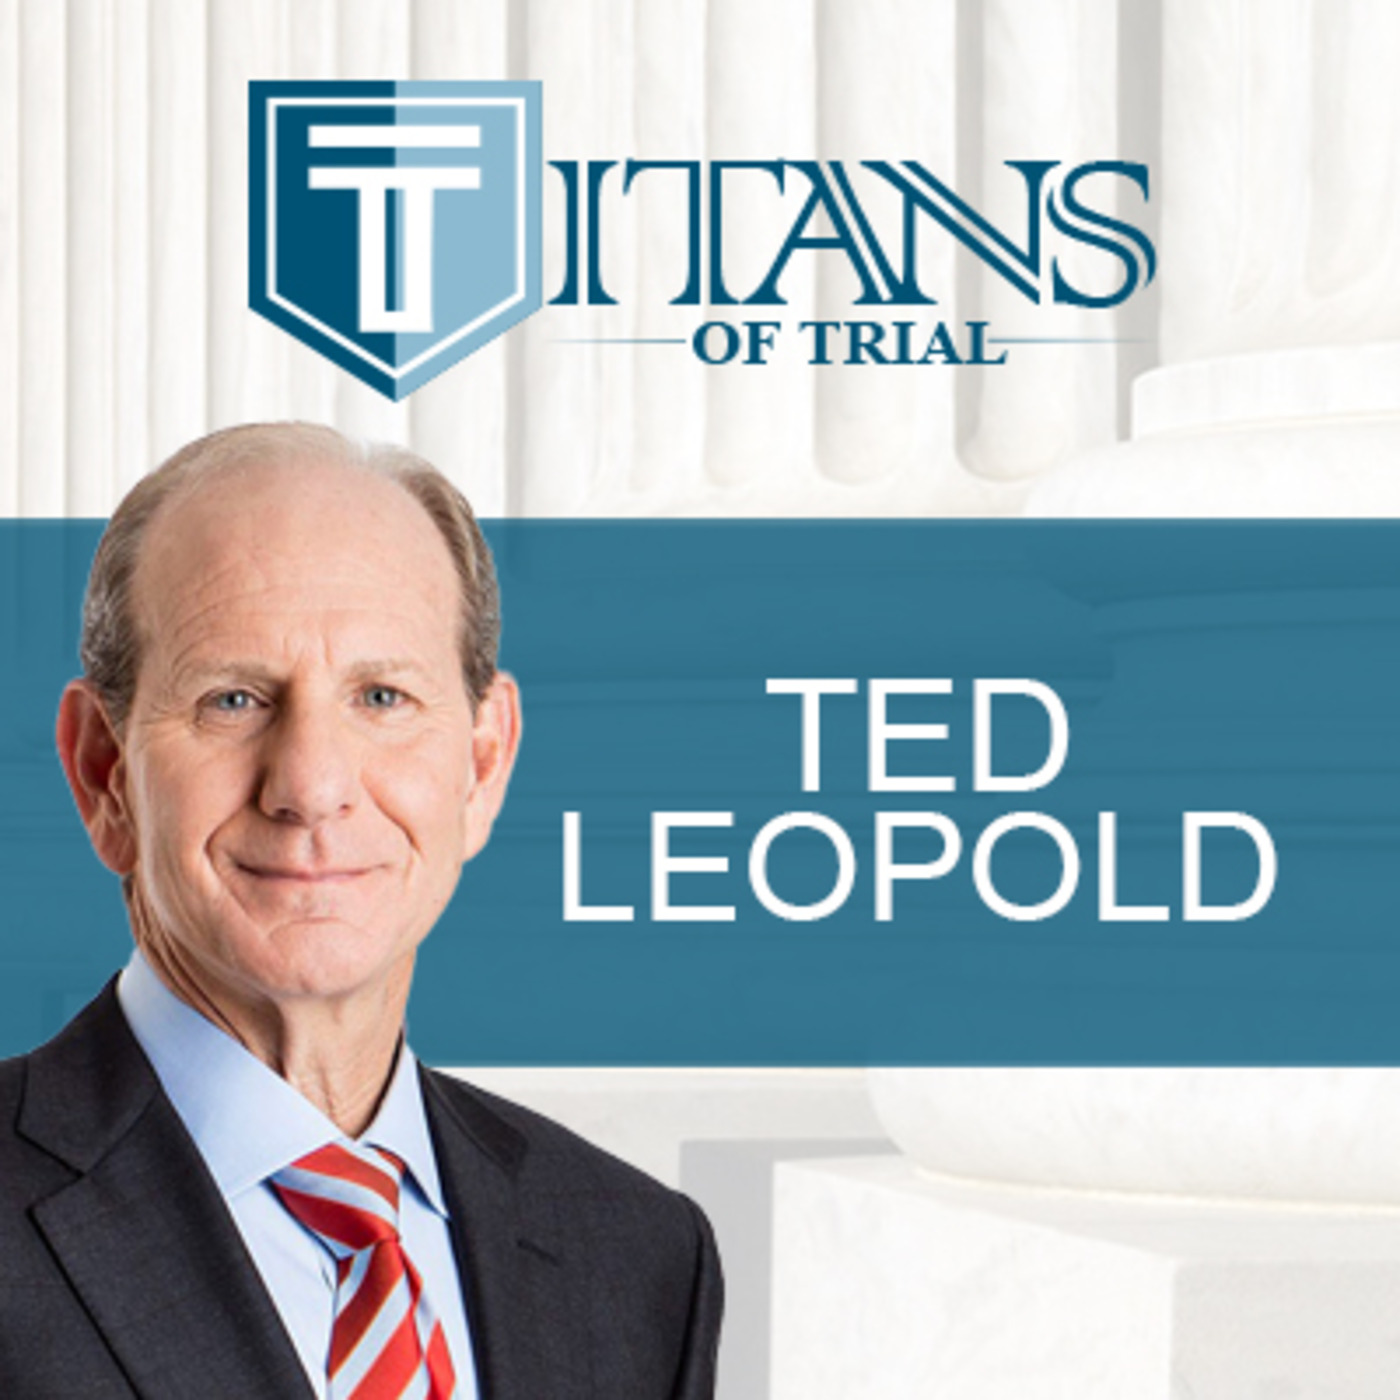 Titans of Trial – Ted Leopold